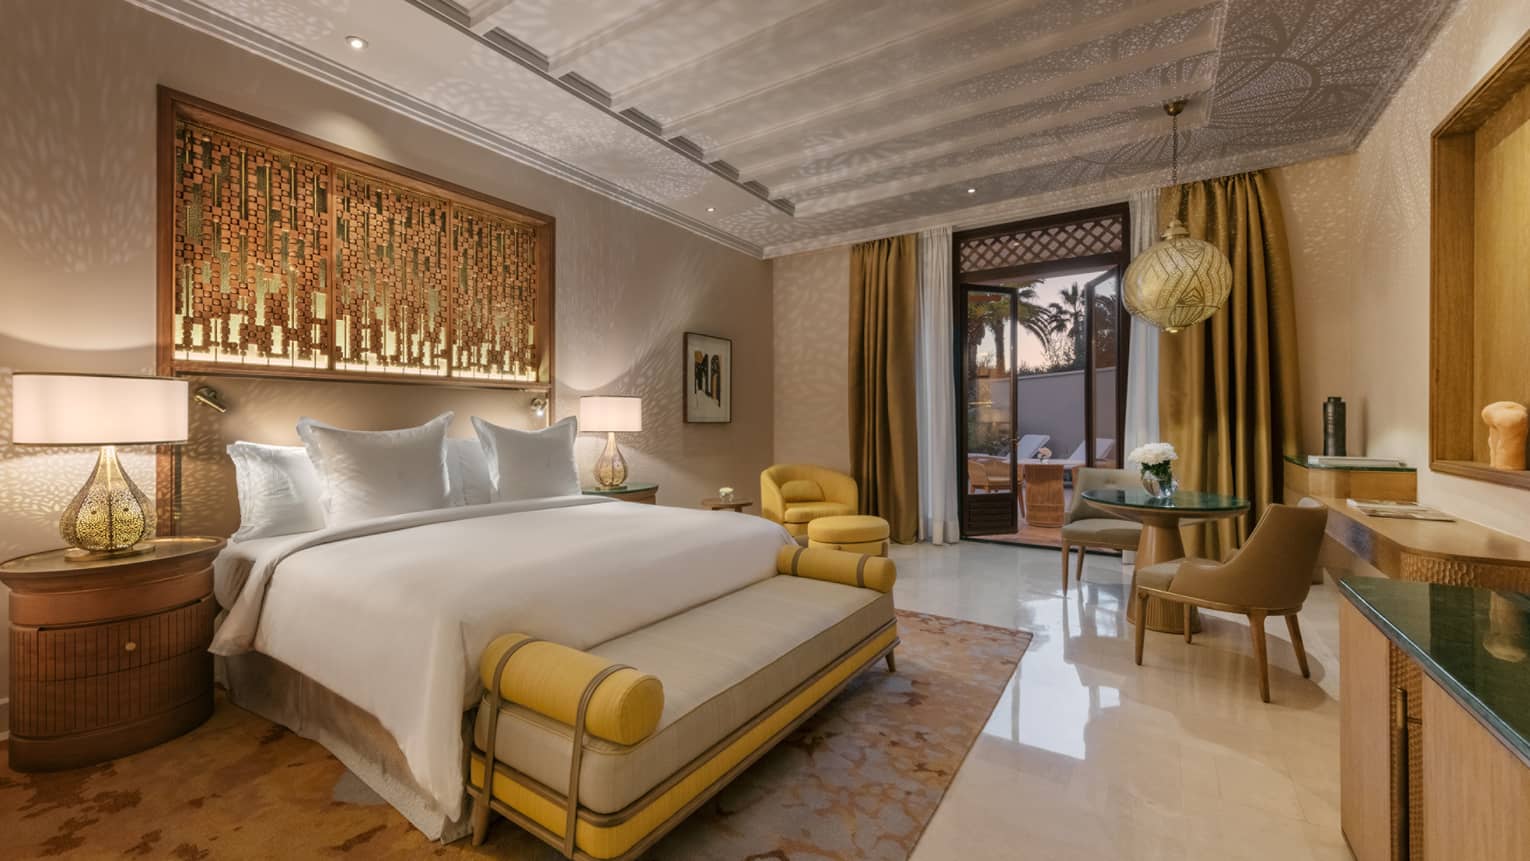 Marrakech hotel room with king bed, cushioned bench, yellow and bronze accents